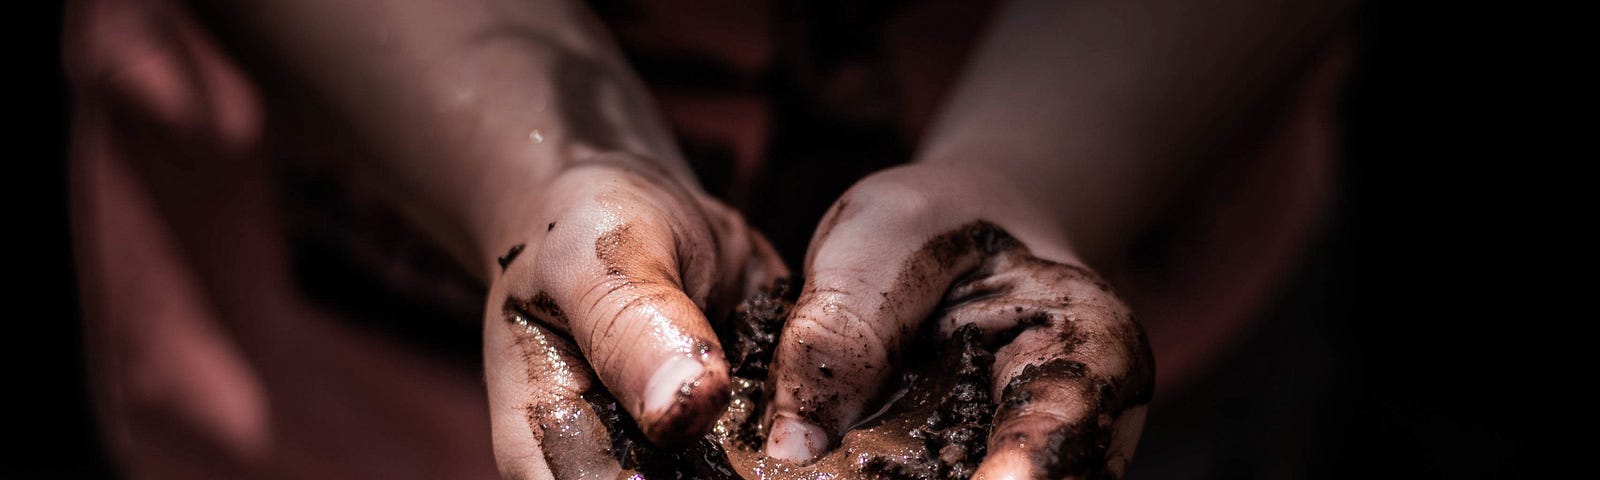 close up of child’s hand holding mud and making heart shape